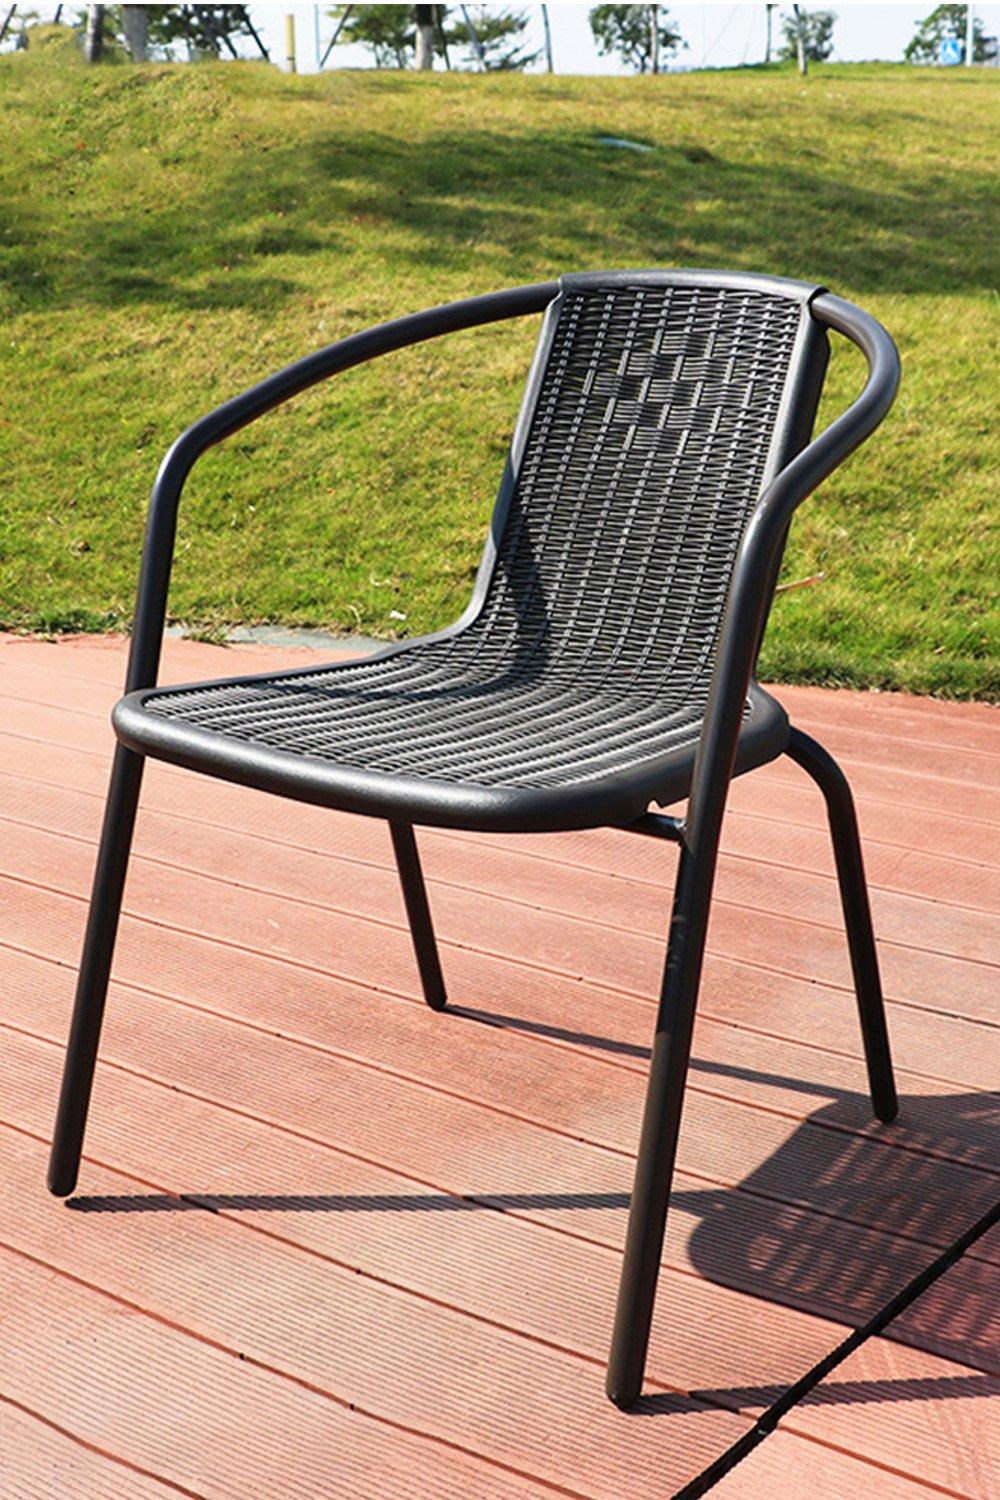 Image of Save 62%: Rattan Stacking Garden Chairs Set of 4